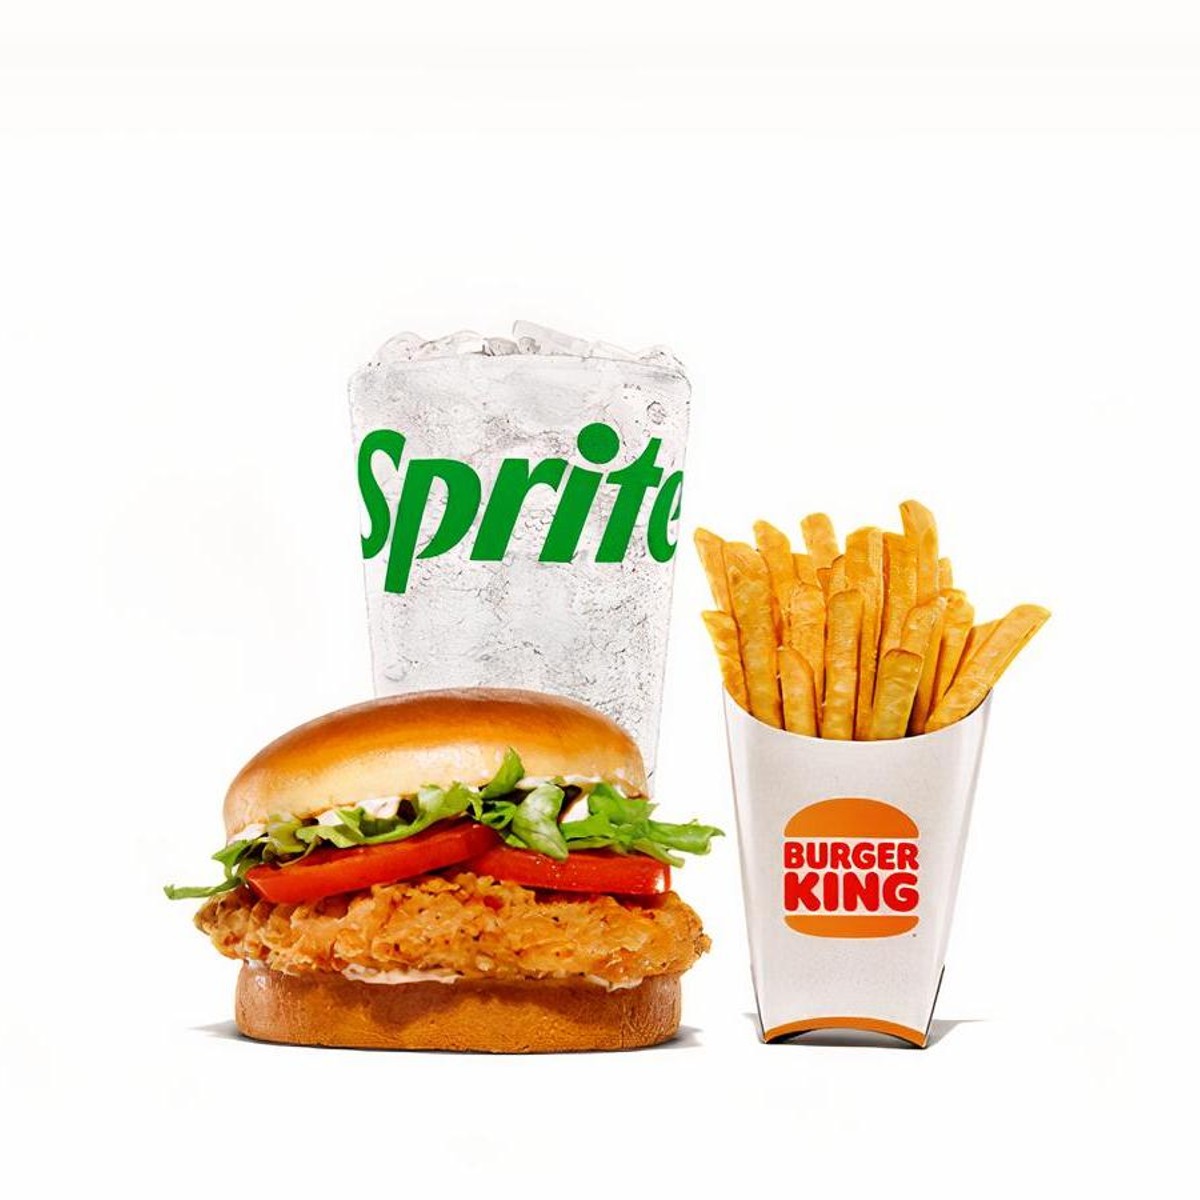 Burger King Will Have A Hand-Breaded Crispy Chicken Sandwich